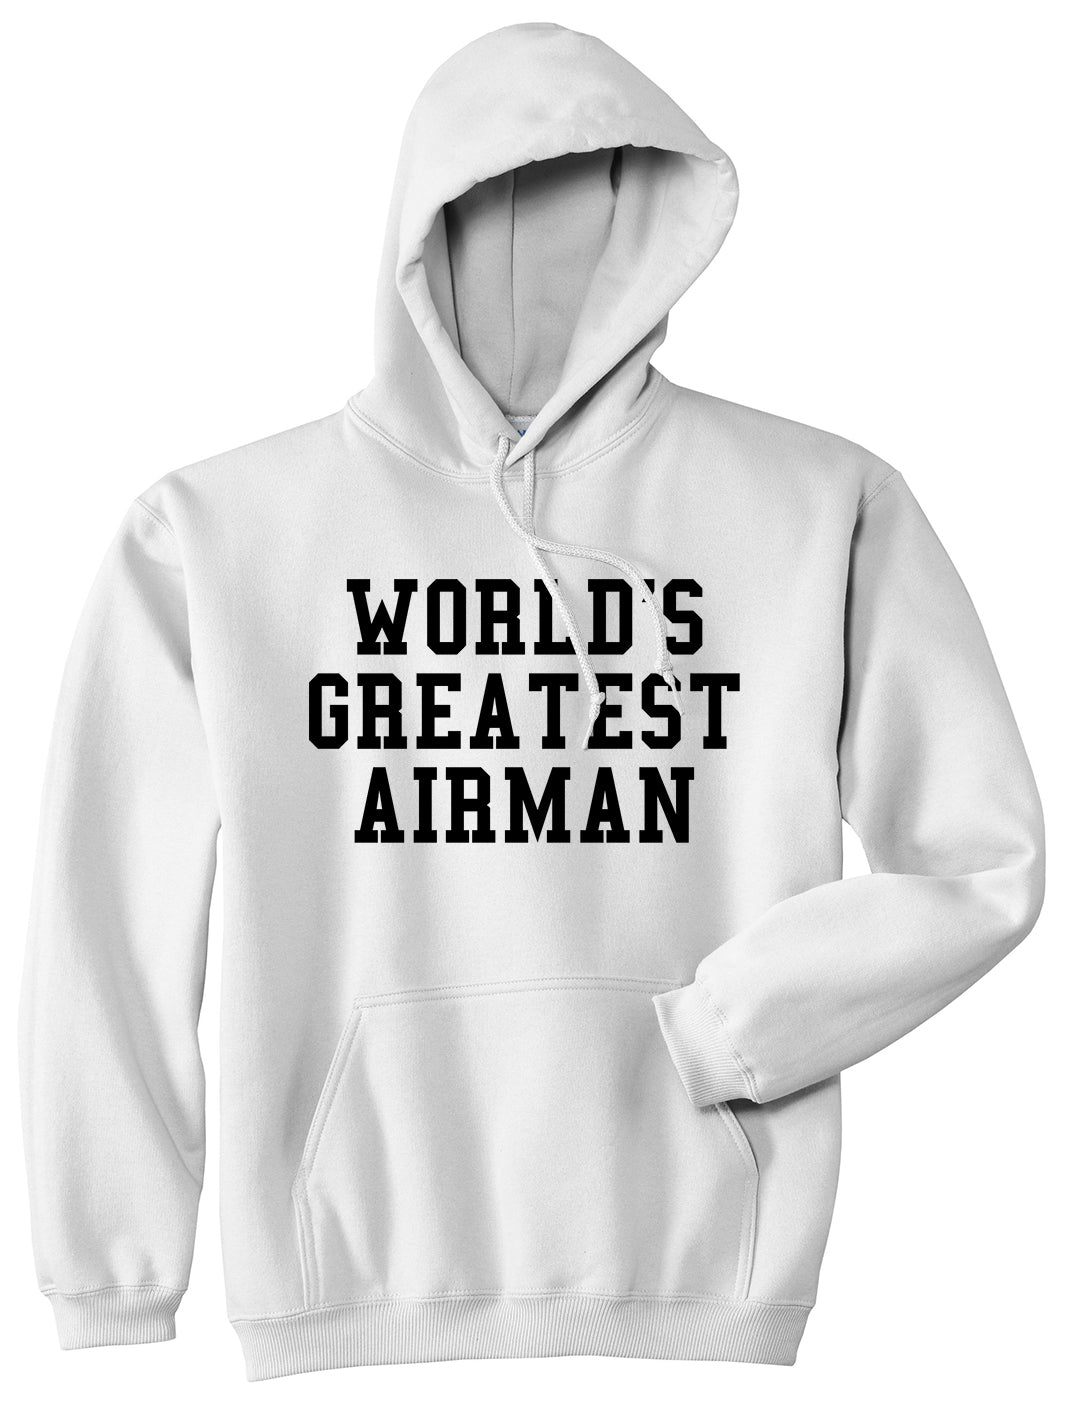 Worlds Greatest Airman Pilot Mens Pullover Hoodie White